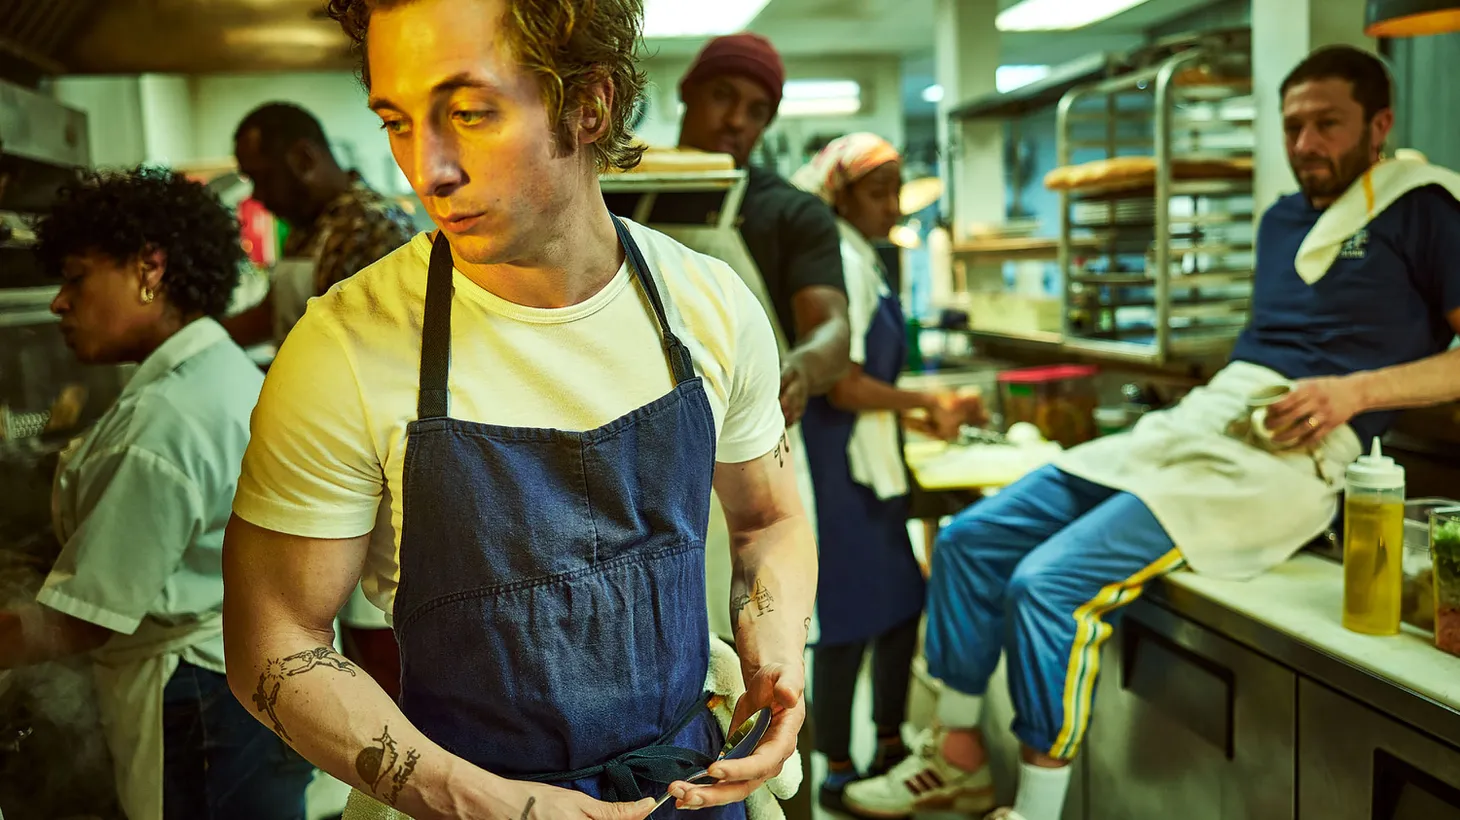 Depicting a chef in “The Bear,” actor Jeremy Allen White says he started drawing parallels between the craft of pulling together a movie or play and composing a meal at a restaurant.